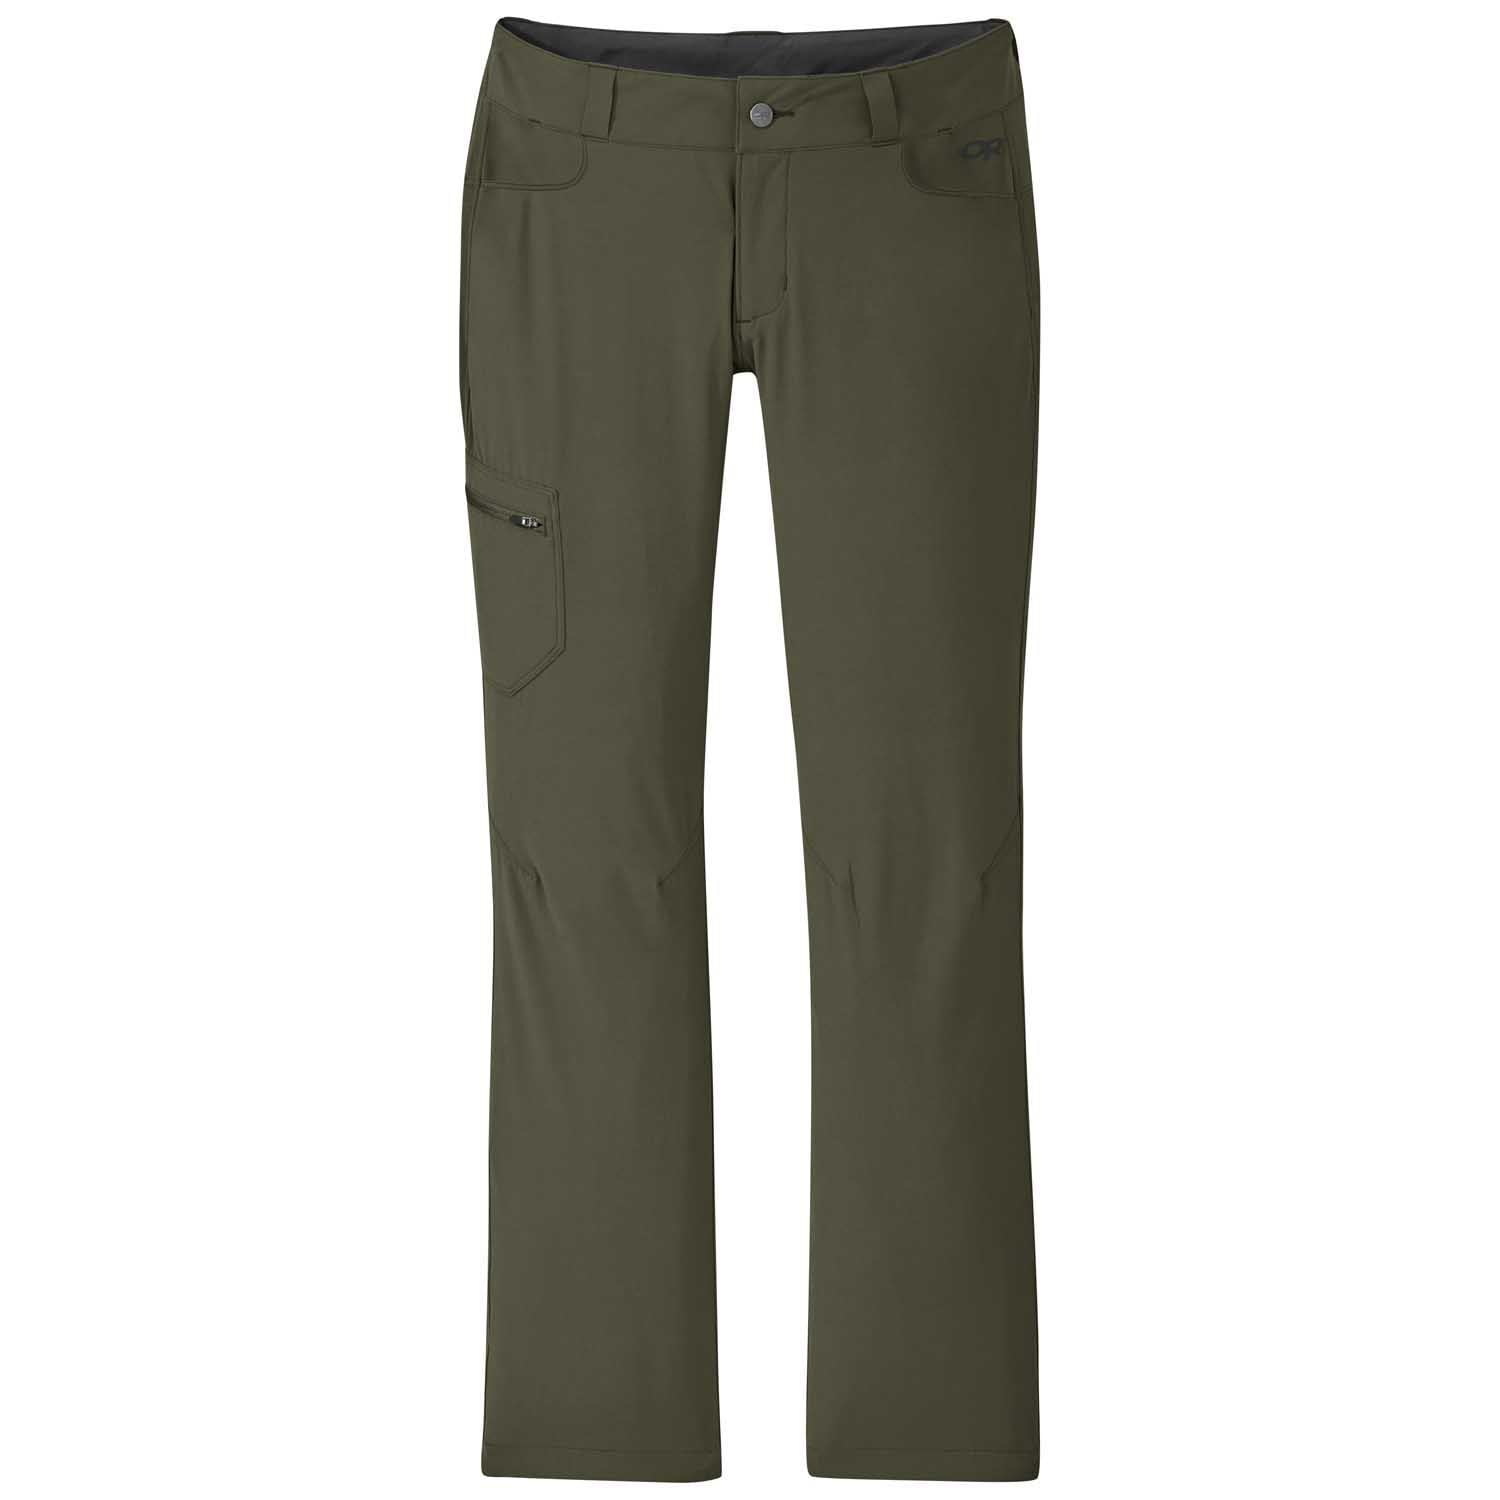 Outdoor Research Women's Ferrosi Pant